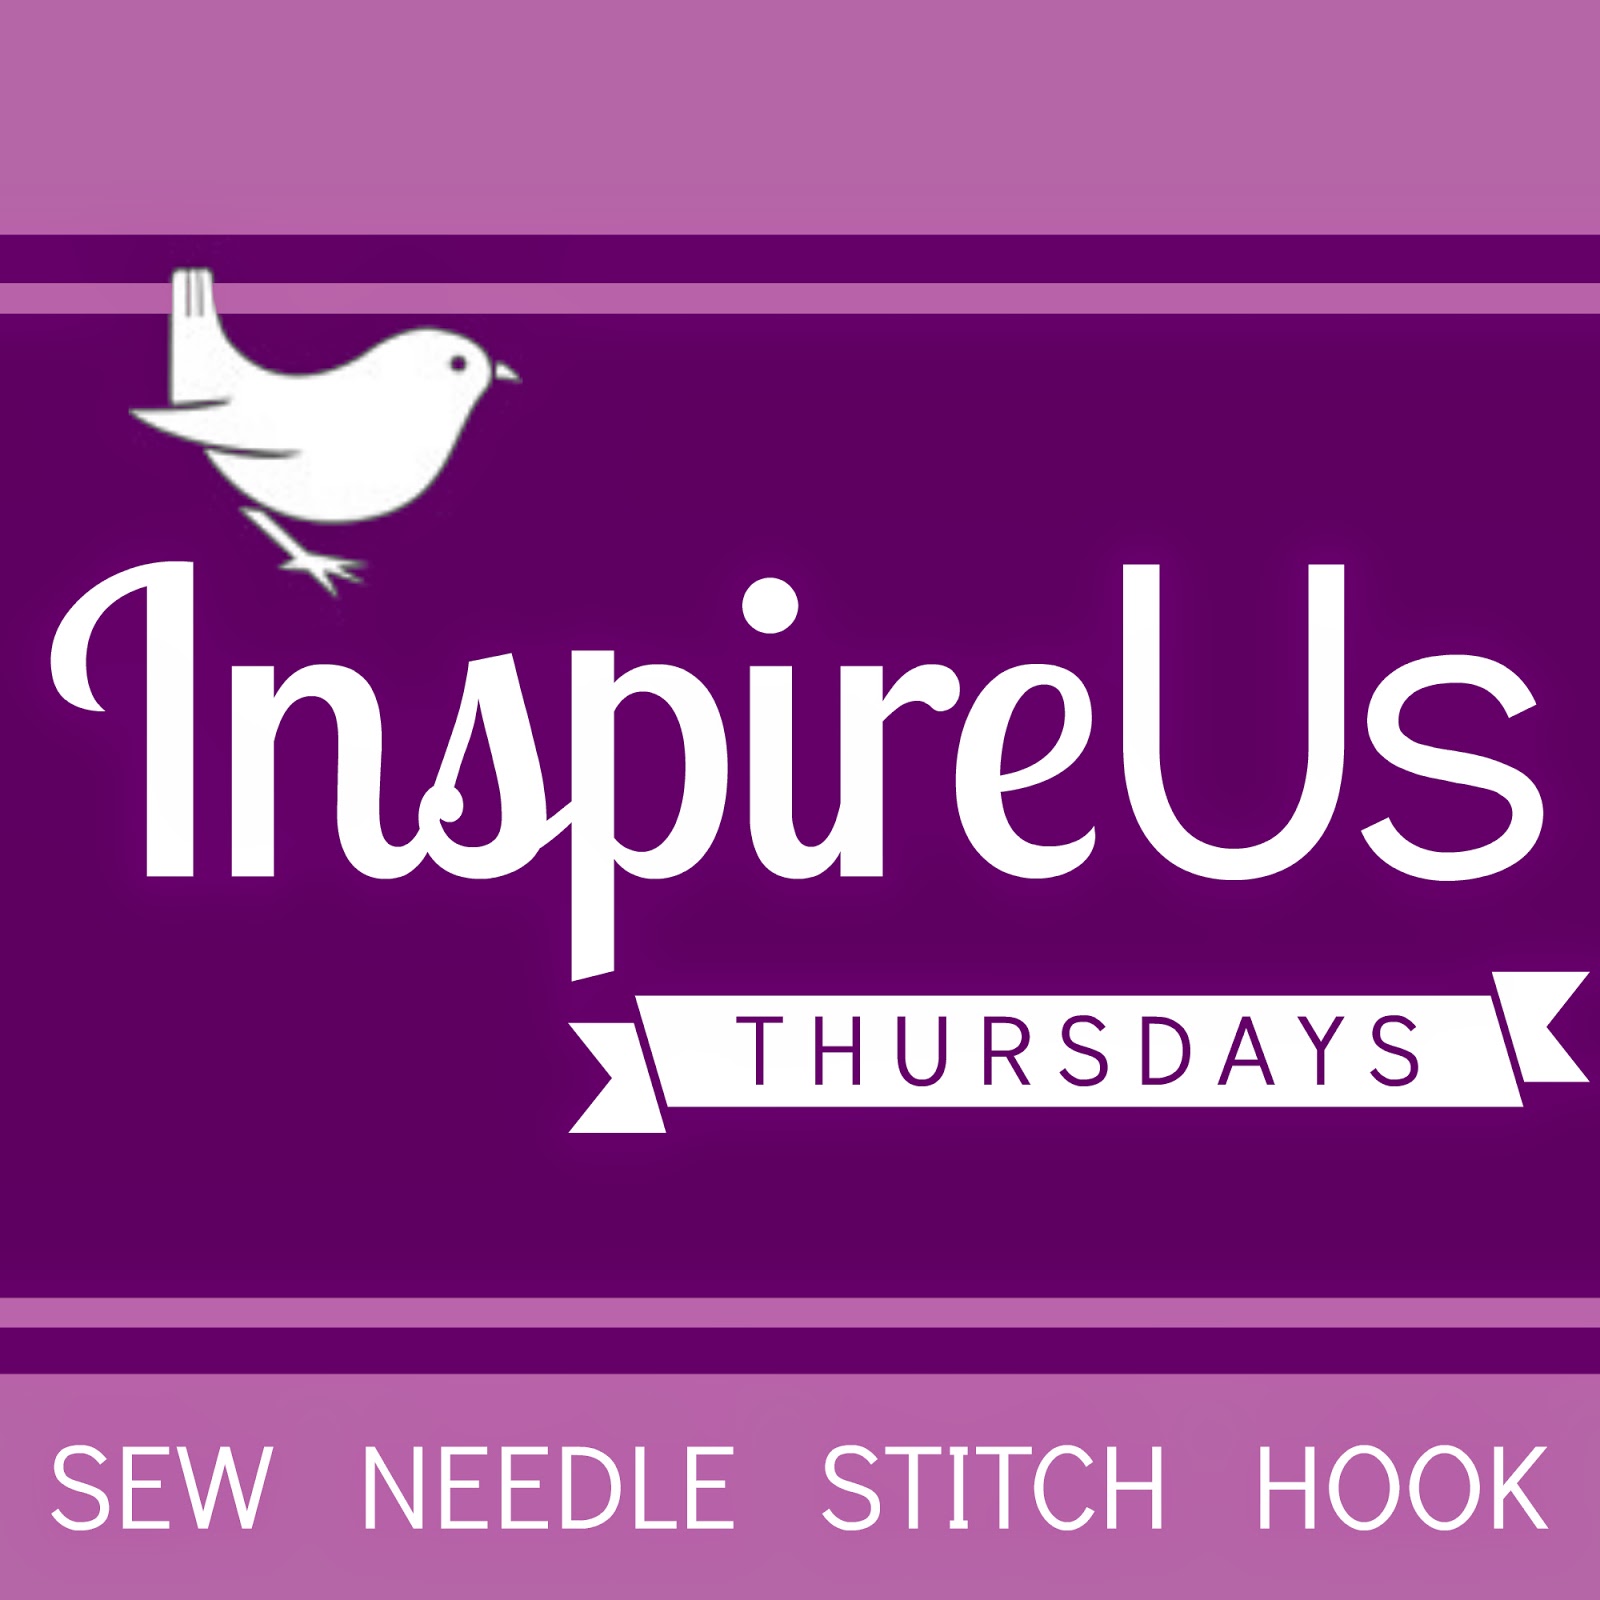 Inspire Us Thursdays: Sew Needle Stitch Hook. Join us for a weekly Link Party of sewing, knitting, cross-stitch, and crochet; of fabric, yarn, and embroidery floss; all on The Inspired Wren.